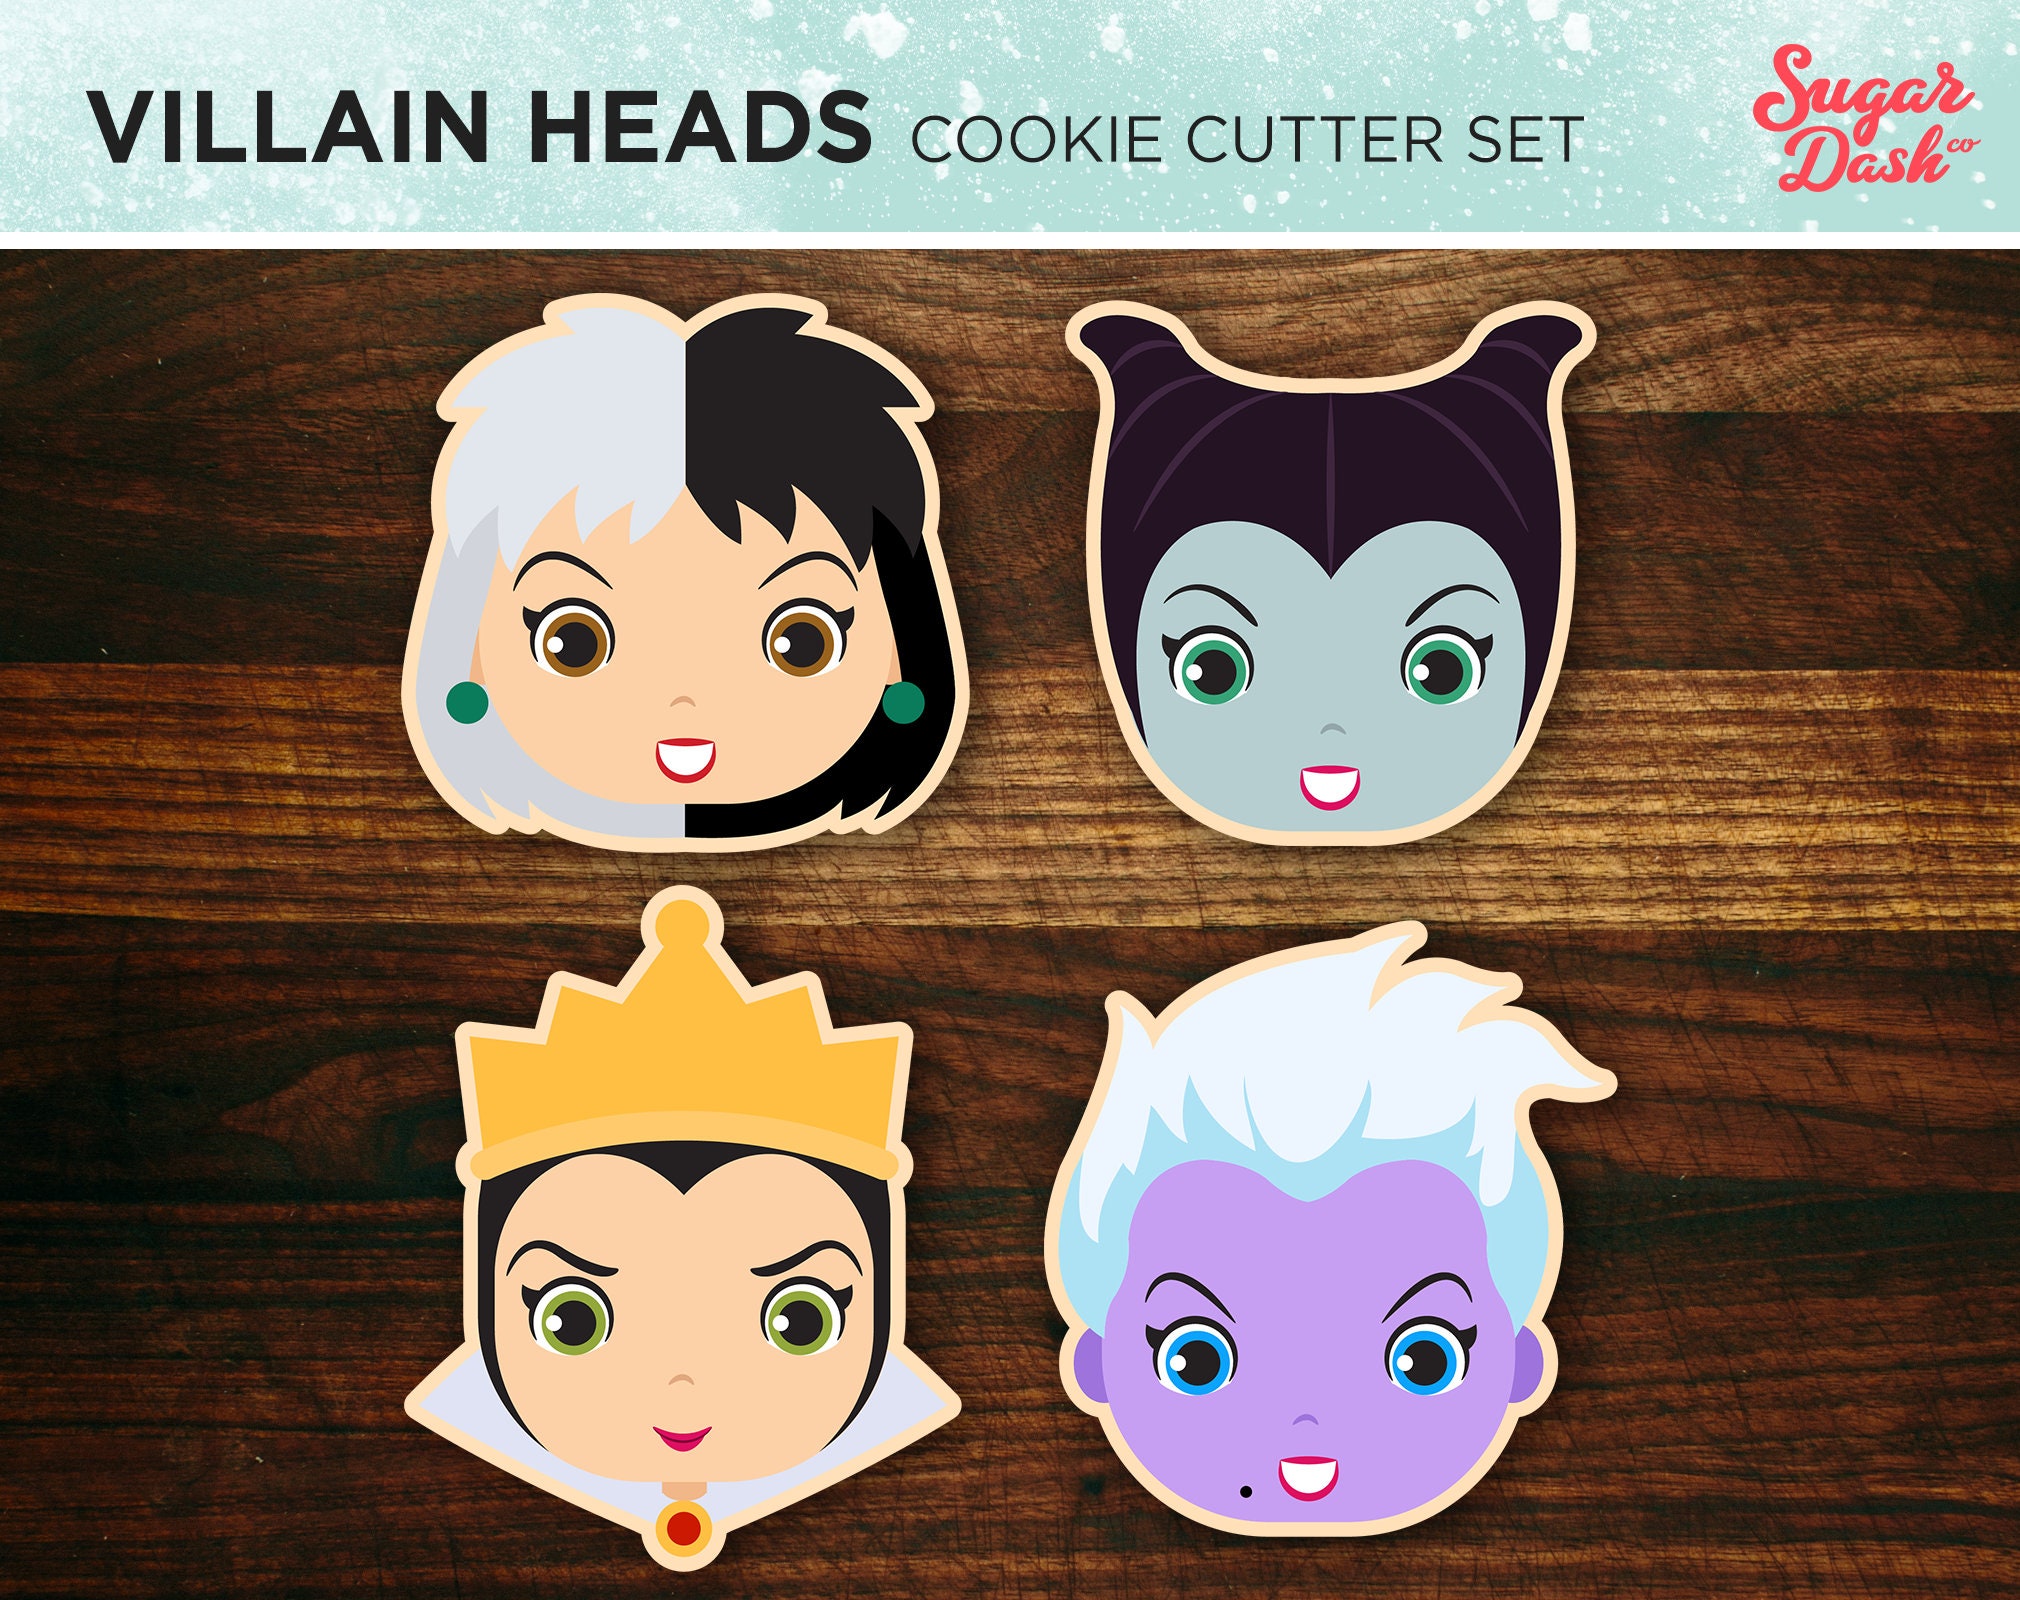 Classic Animated Villains Heads Cookie Cutter Set of 4 